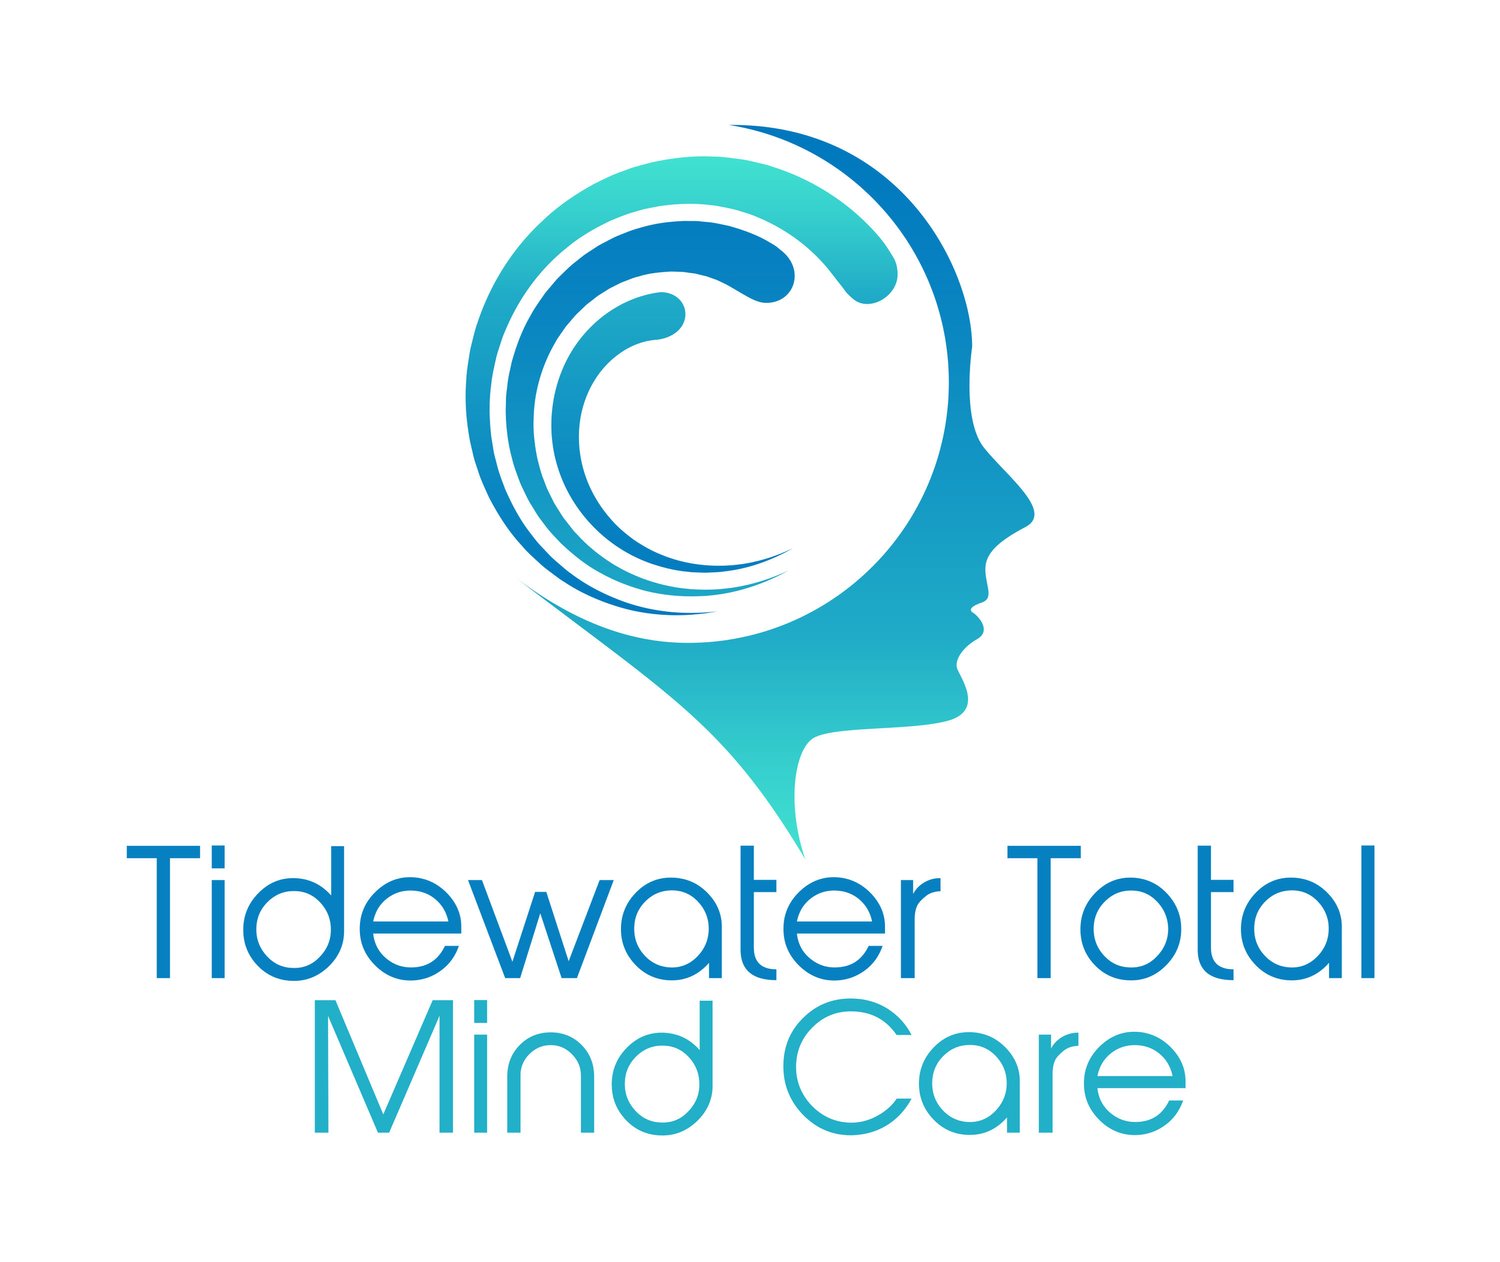 Tidewater Total Mind Care